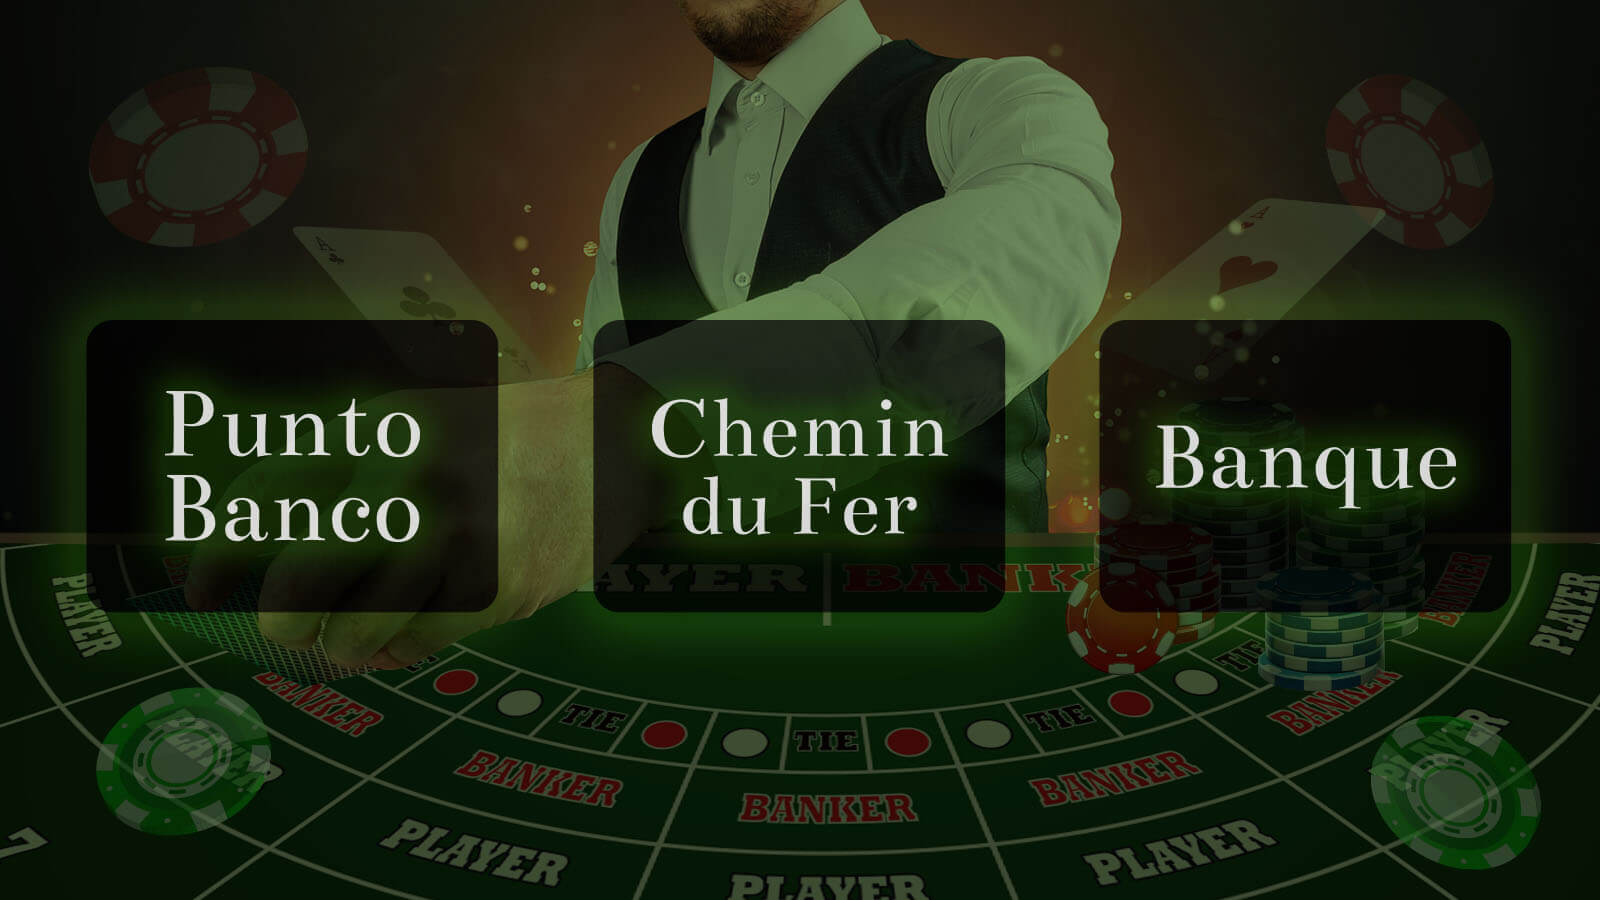 casino apps that pay real money